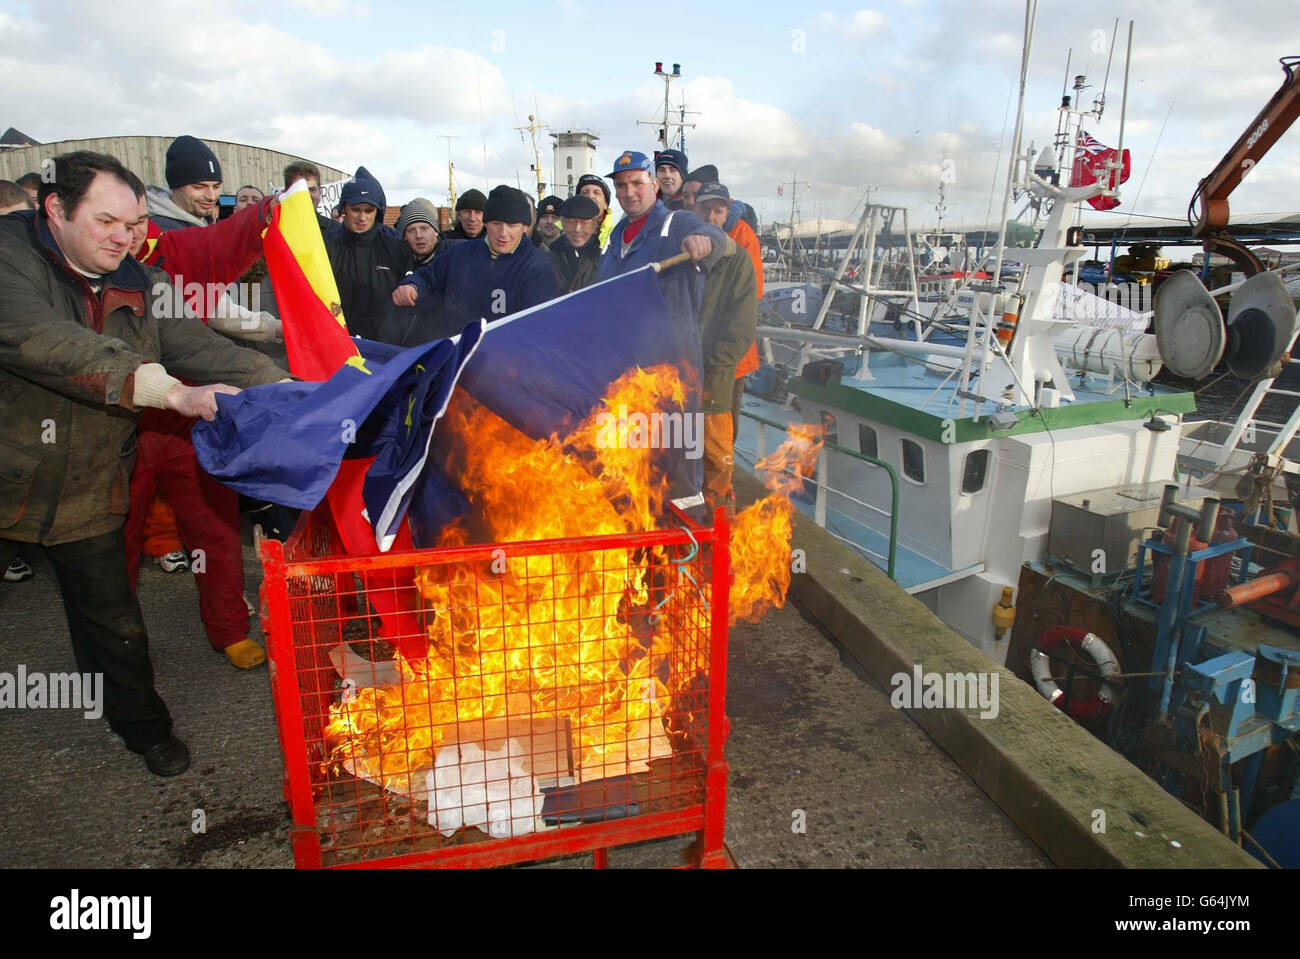 Fishermen at North Shields near Newcastle burn European and Spanish flags in protest about the possible introduction of new European quotas which they say will hit jobs on the East coast of England. Earlier, a flotilla of fishing boats blocked the River Tyne as part of the demonstration. Stock Photo